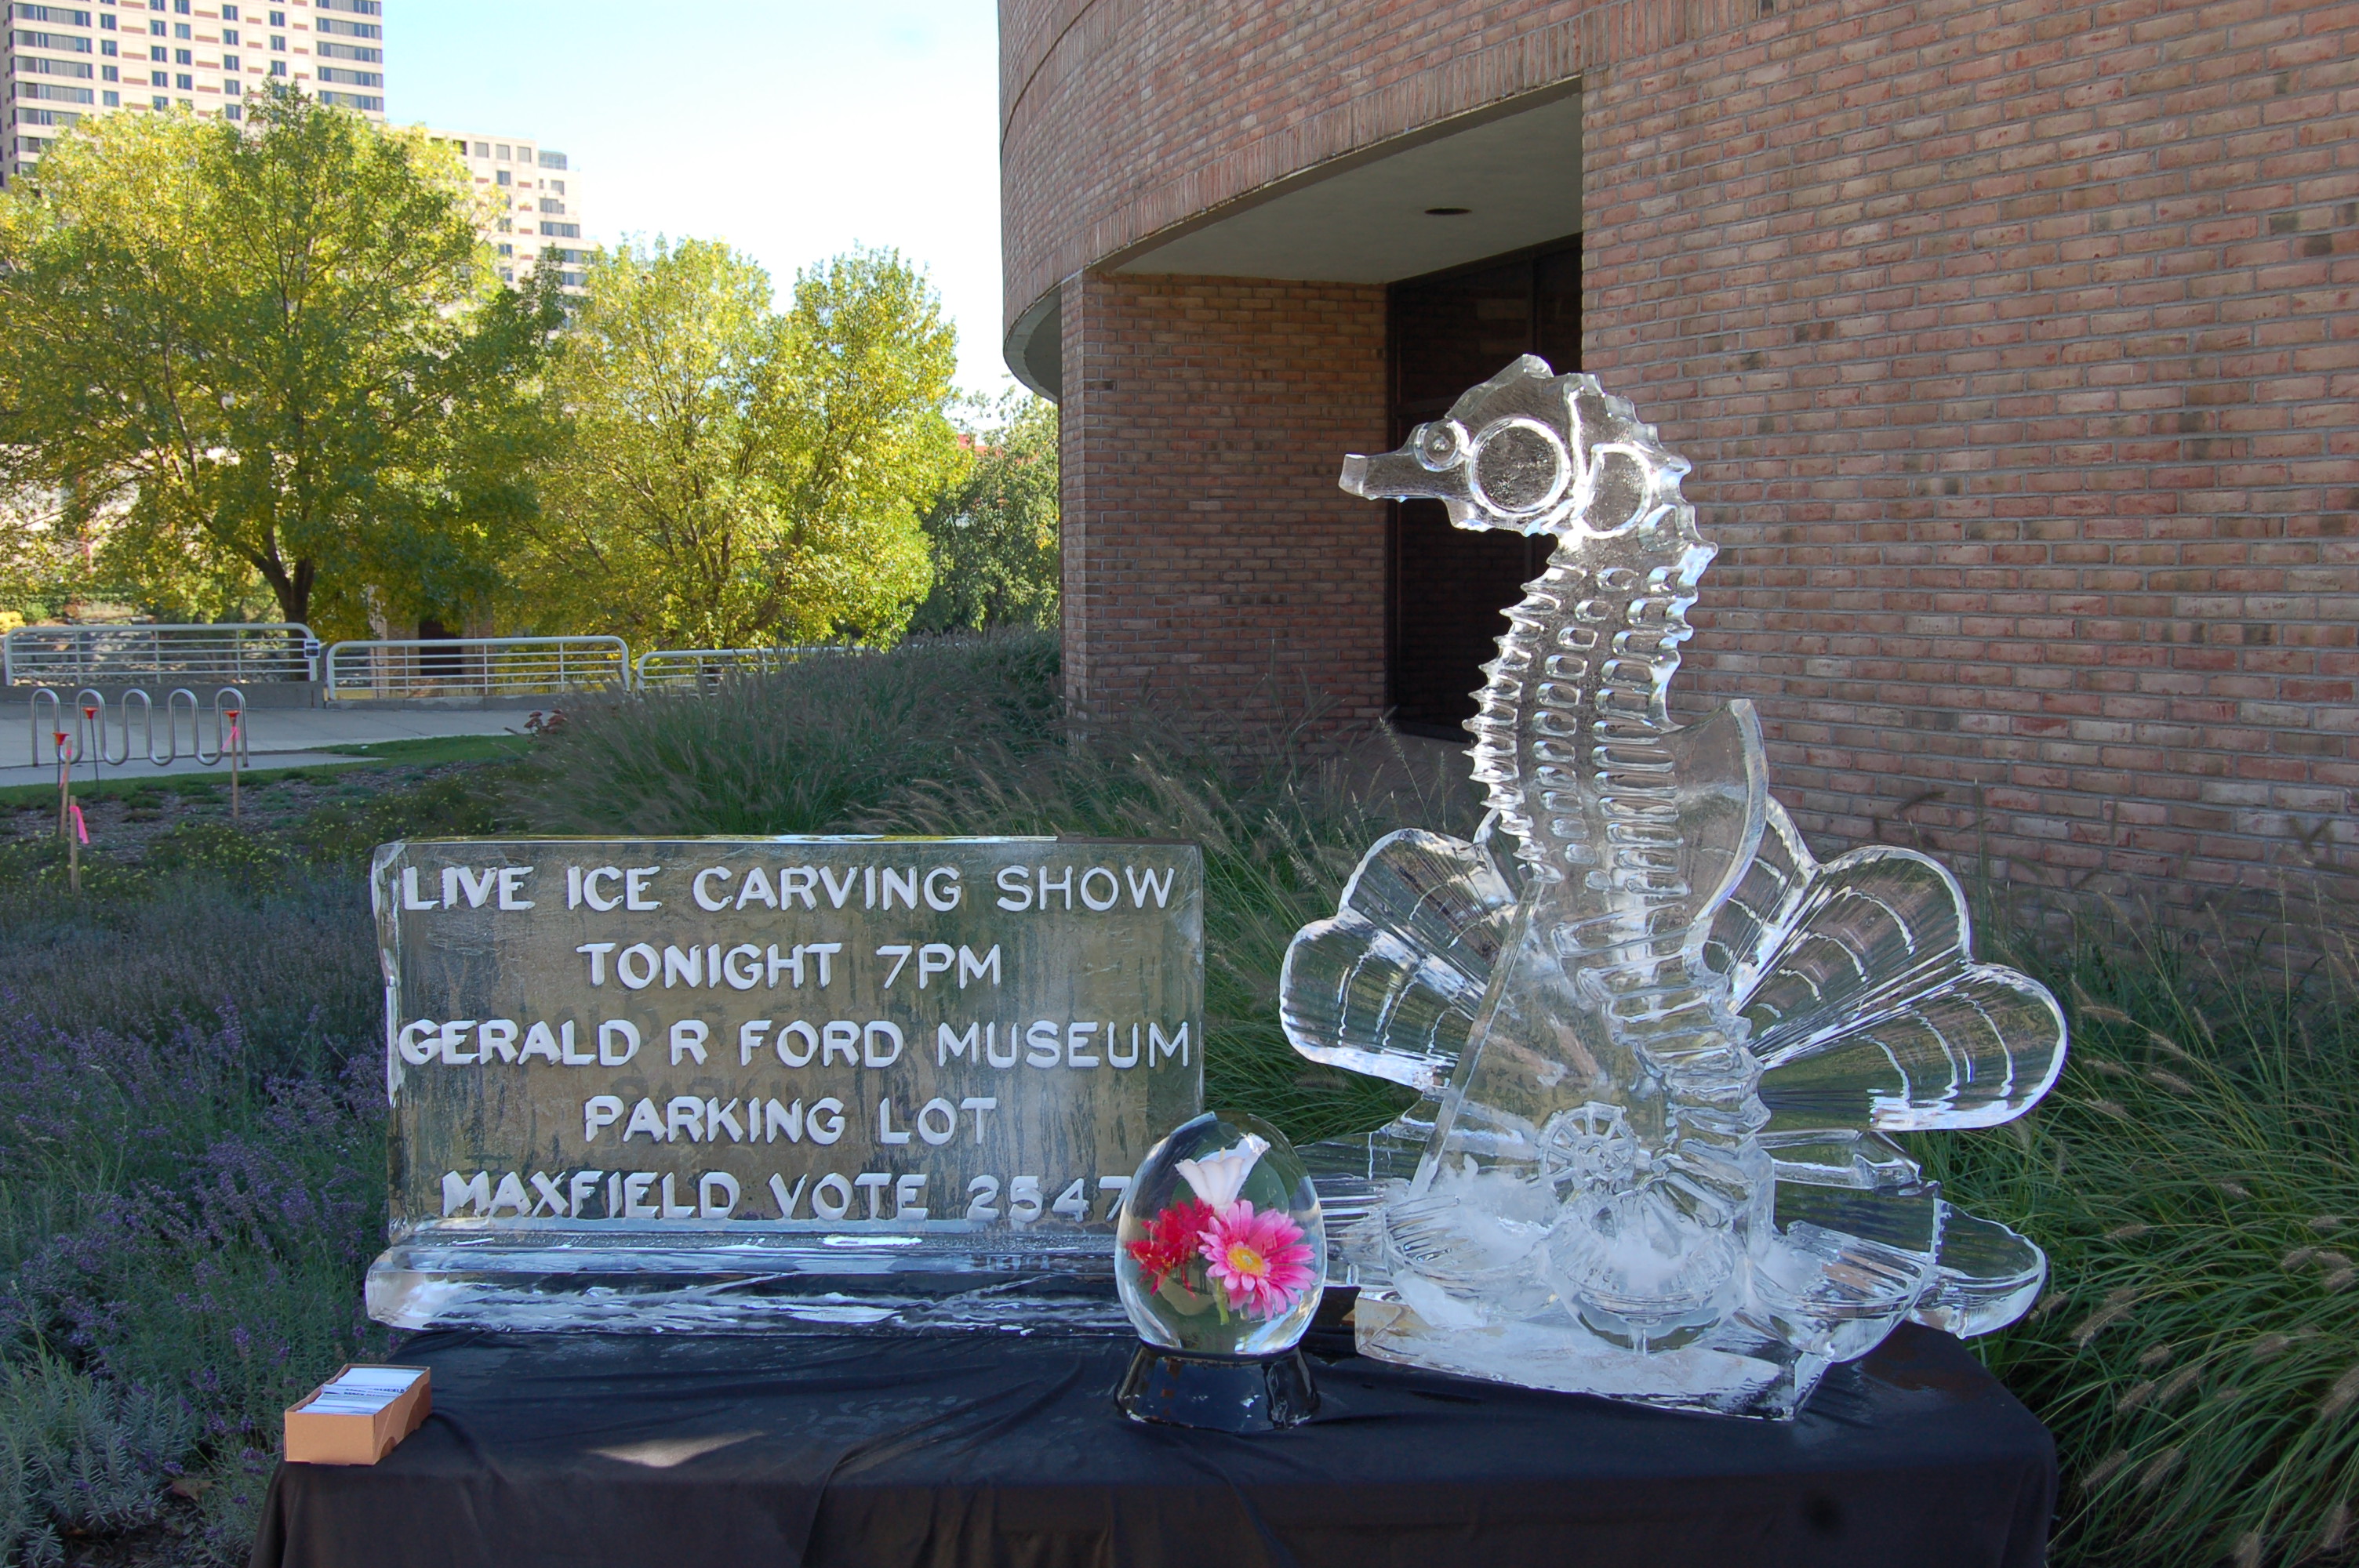 ArtPrize 2009 Ice Carving